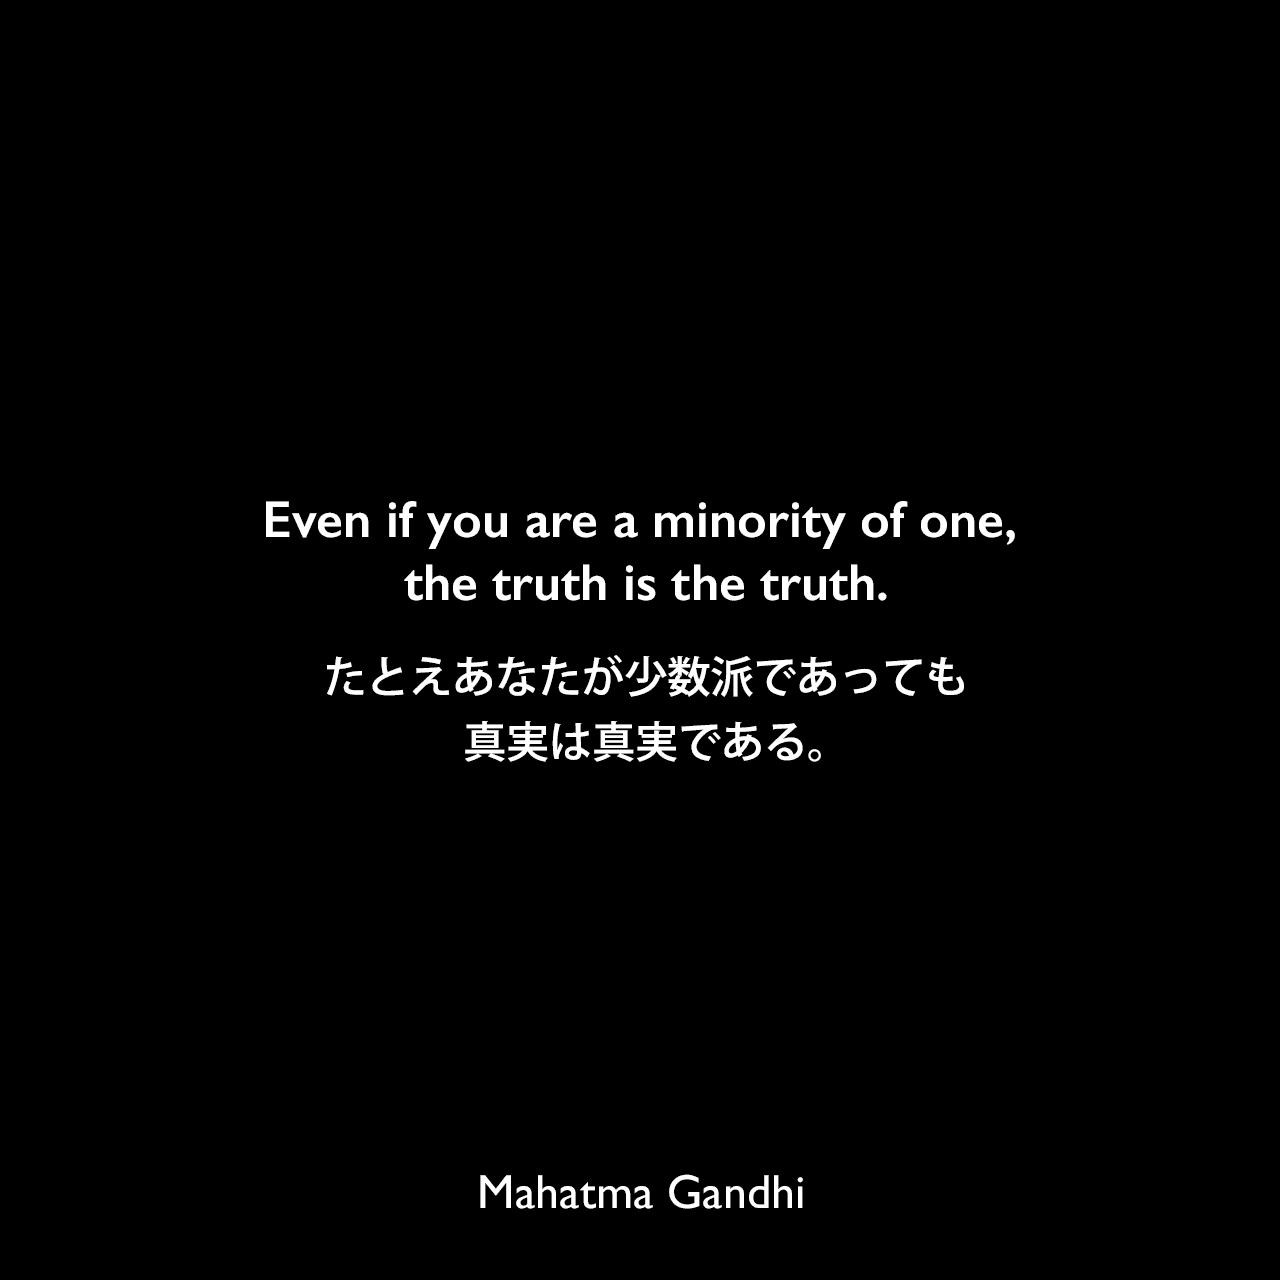 Even if you are a minority of one, the truth is the truth.たとえあなたが少数派であっても、真実は真実である。Mahatma Gandhi